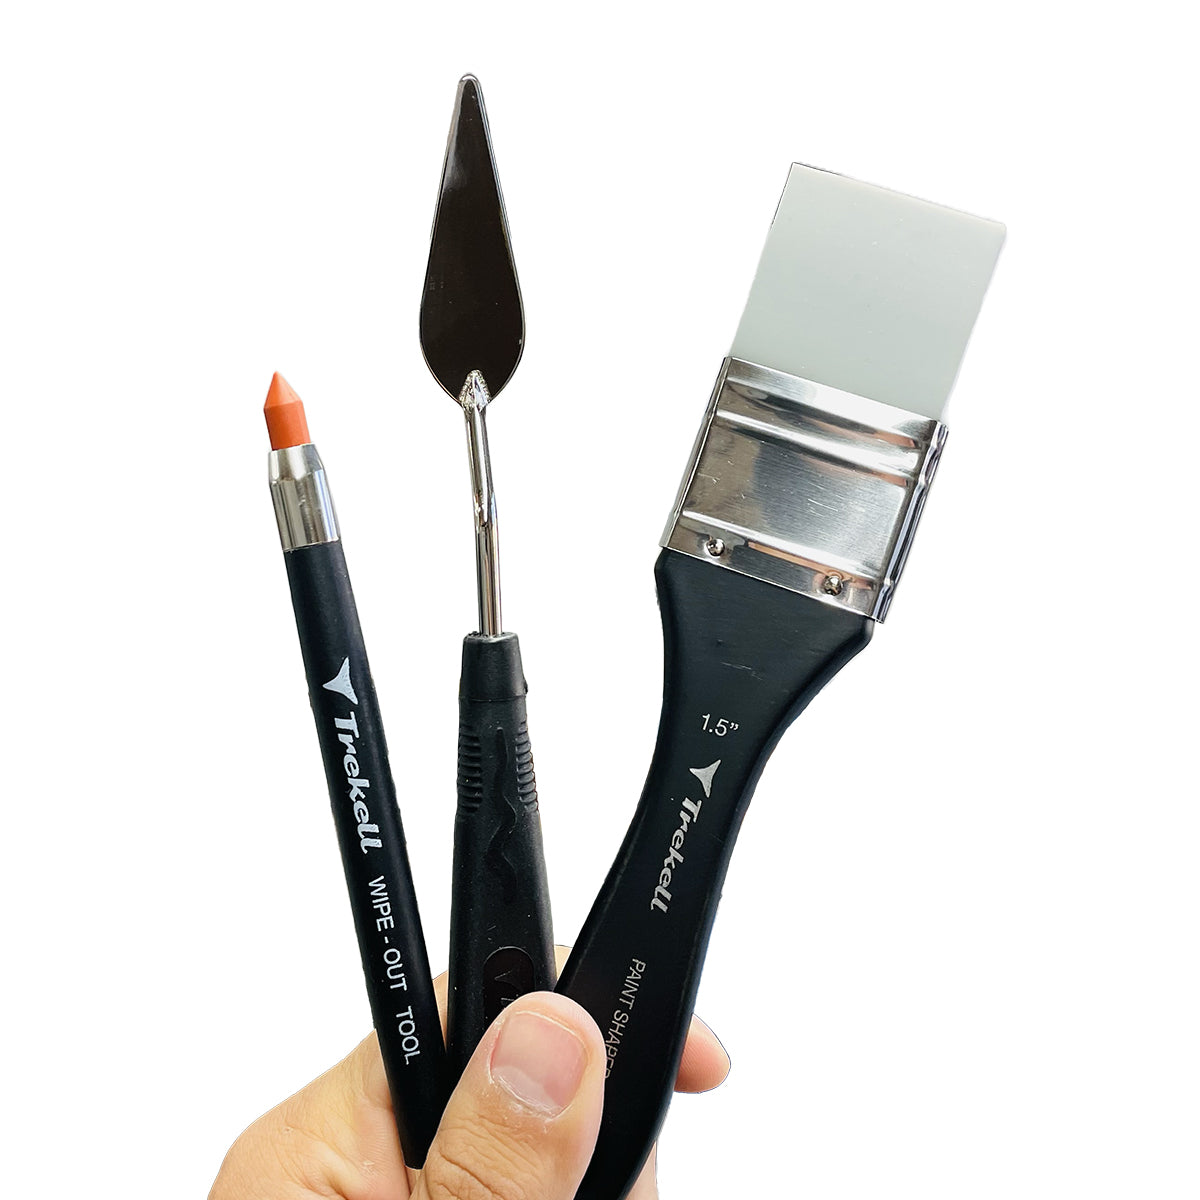 Trekell Alternative Brush 3 Piece Set: Wipe Out Tool, Palette Knife, and #1.5 Paint Shaper